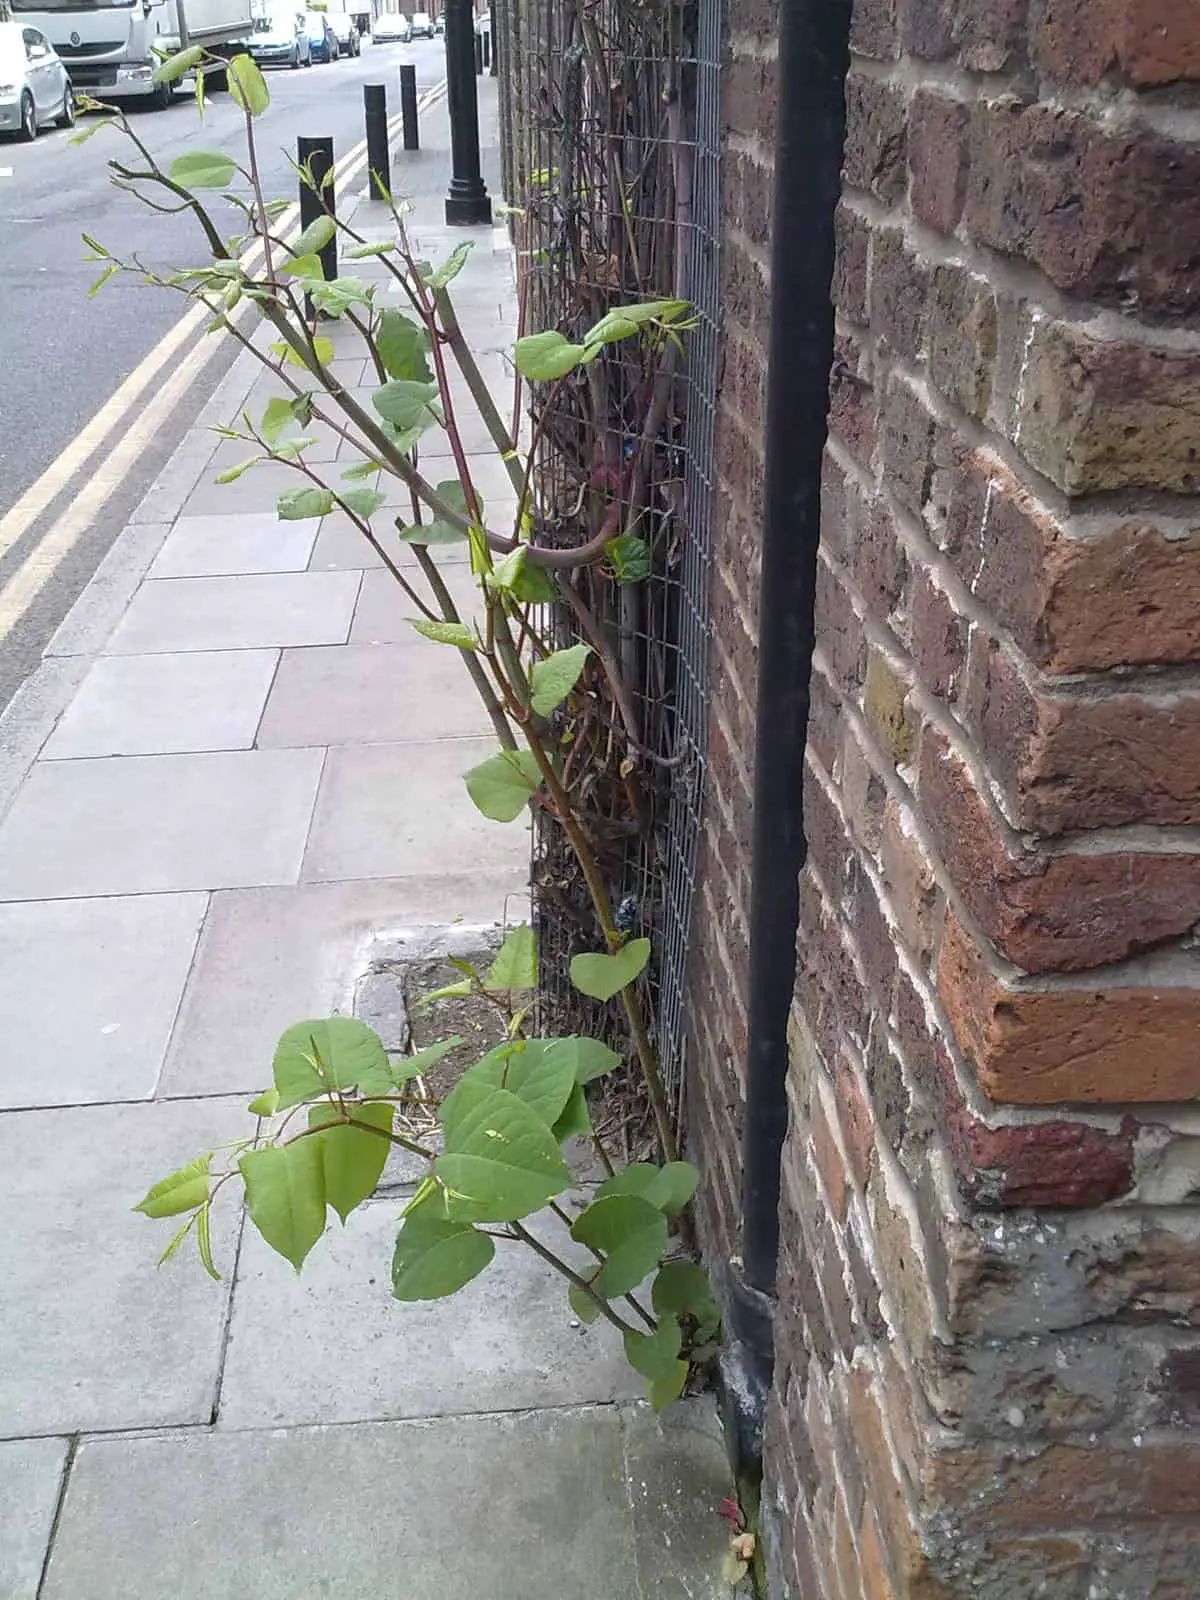 Walls and boundaries are susceptible to Japanese knotweed damage to buildings too